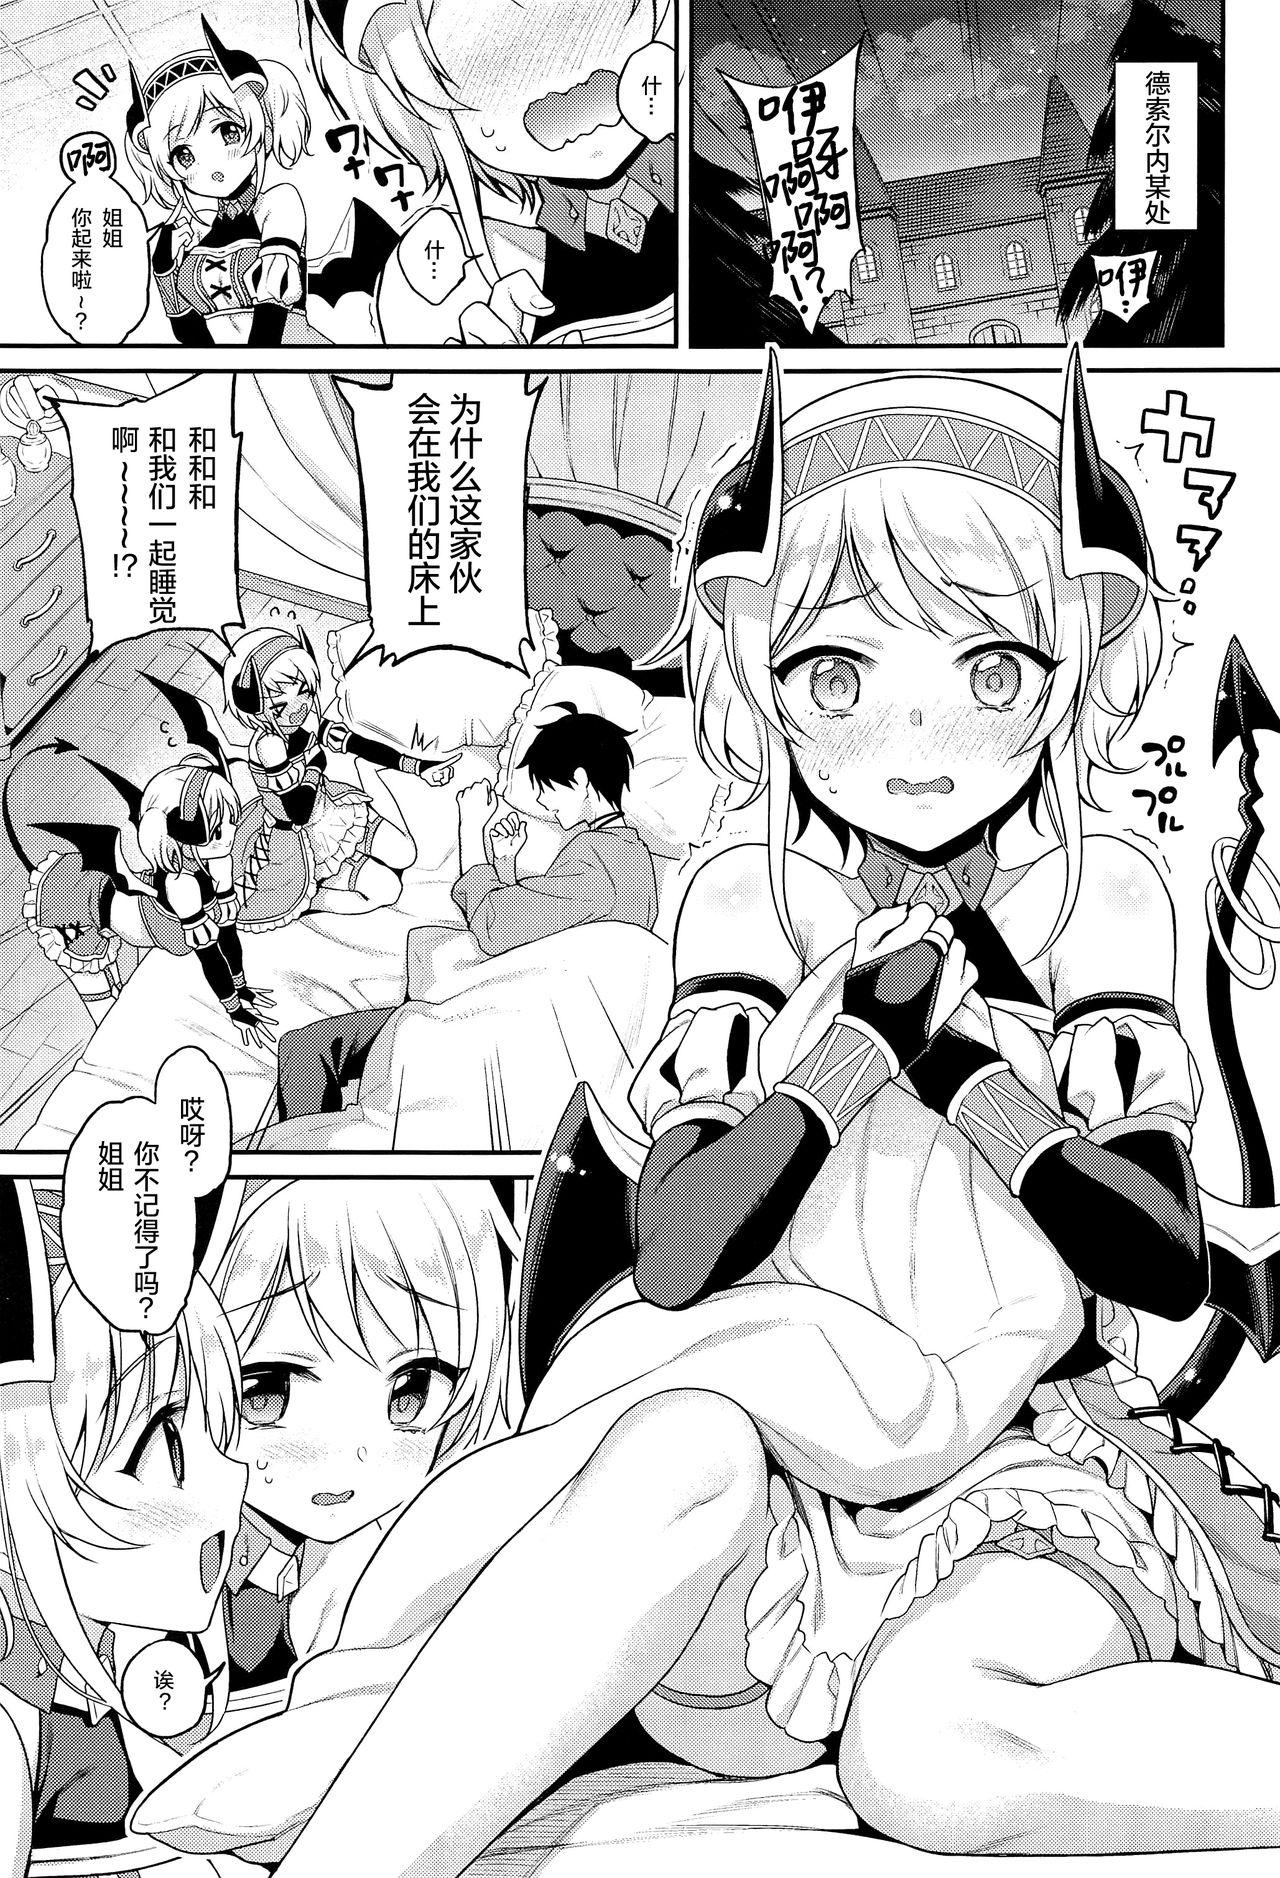 Boots Akari no Onee-chan Produce - Princess connect Furry - Page 3